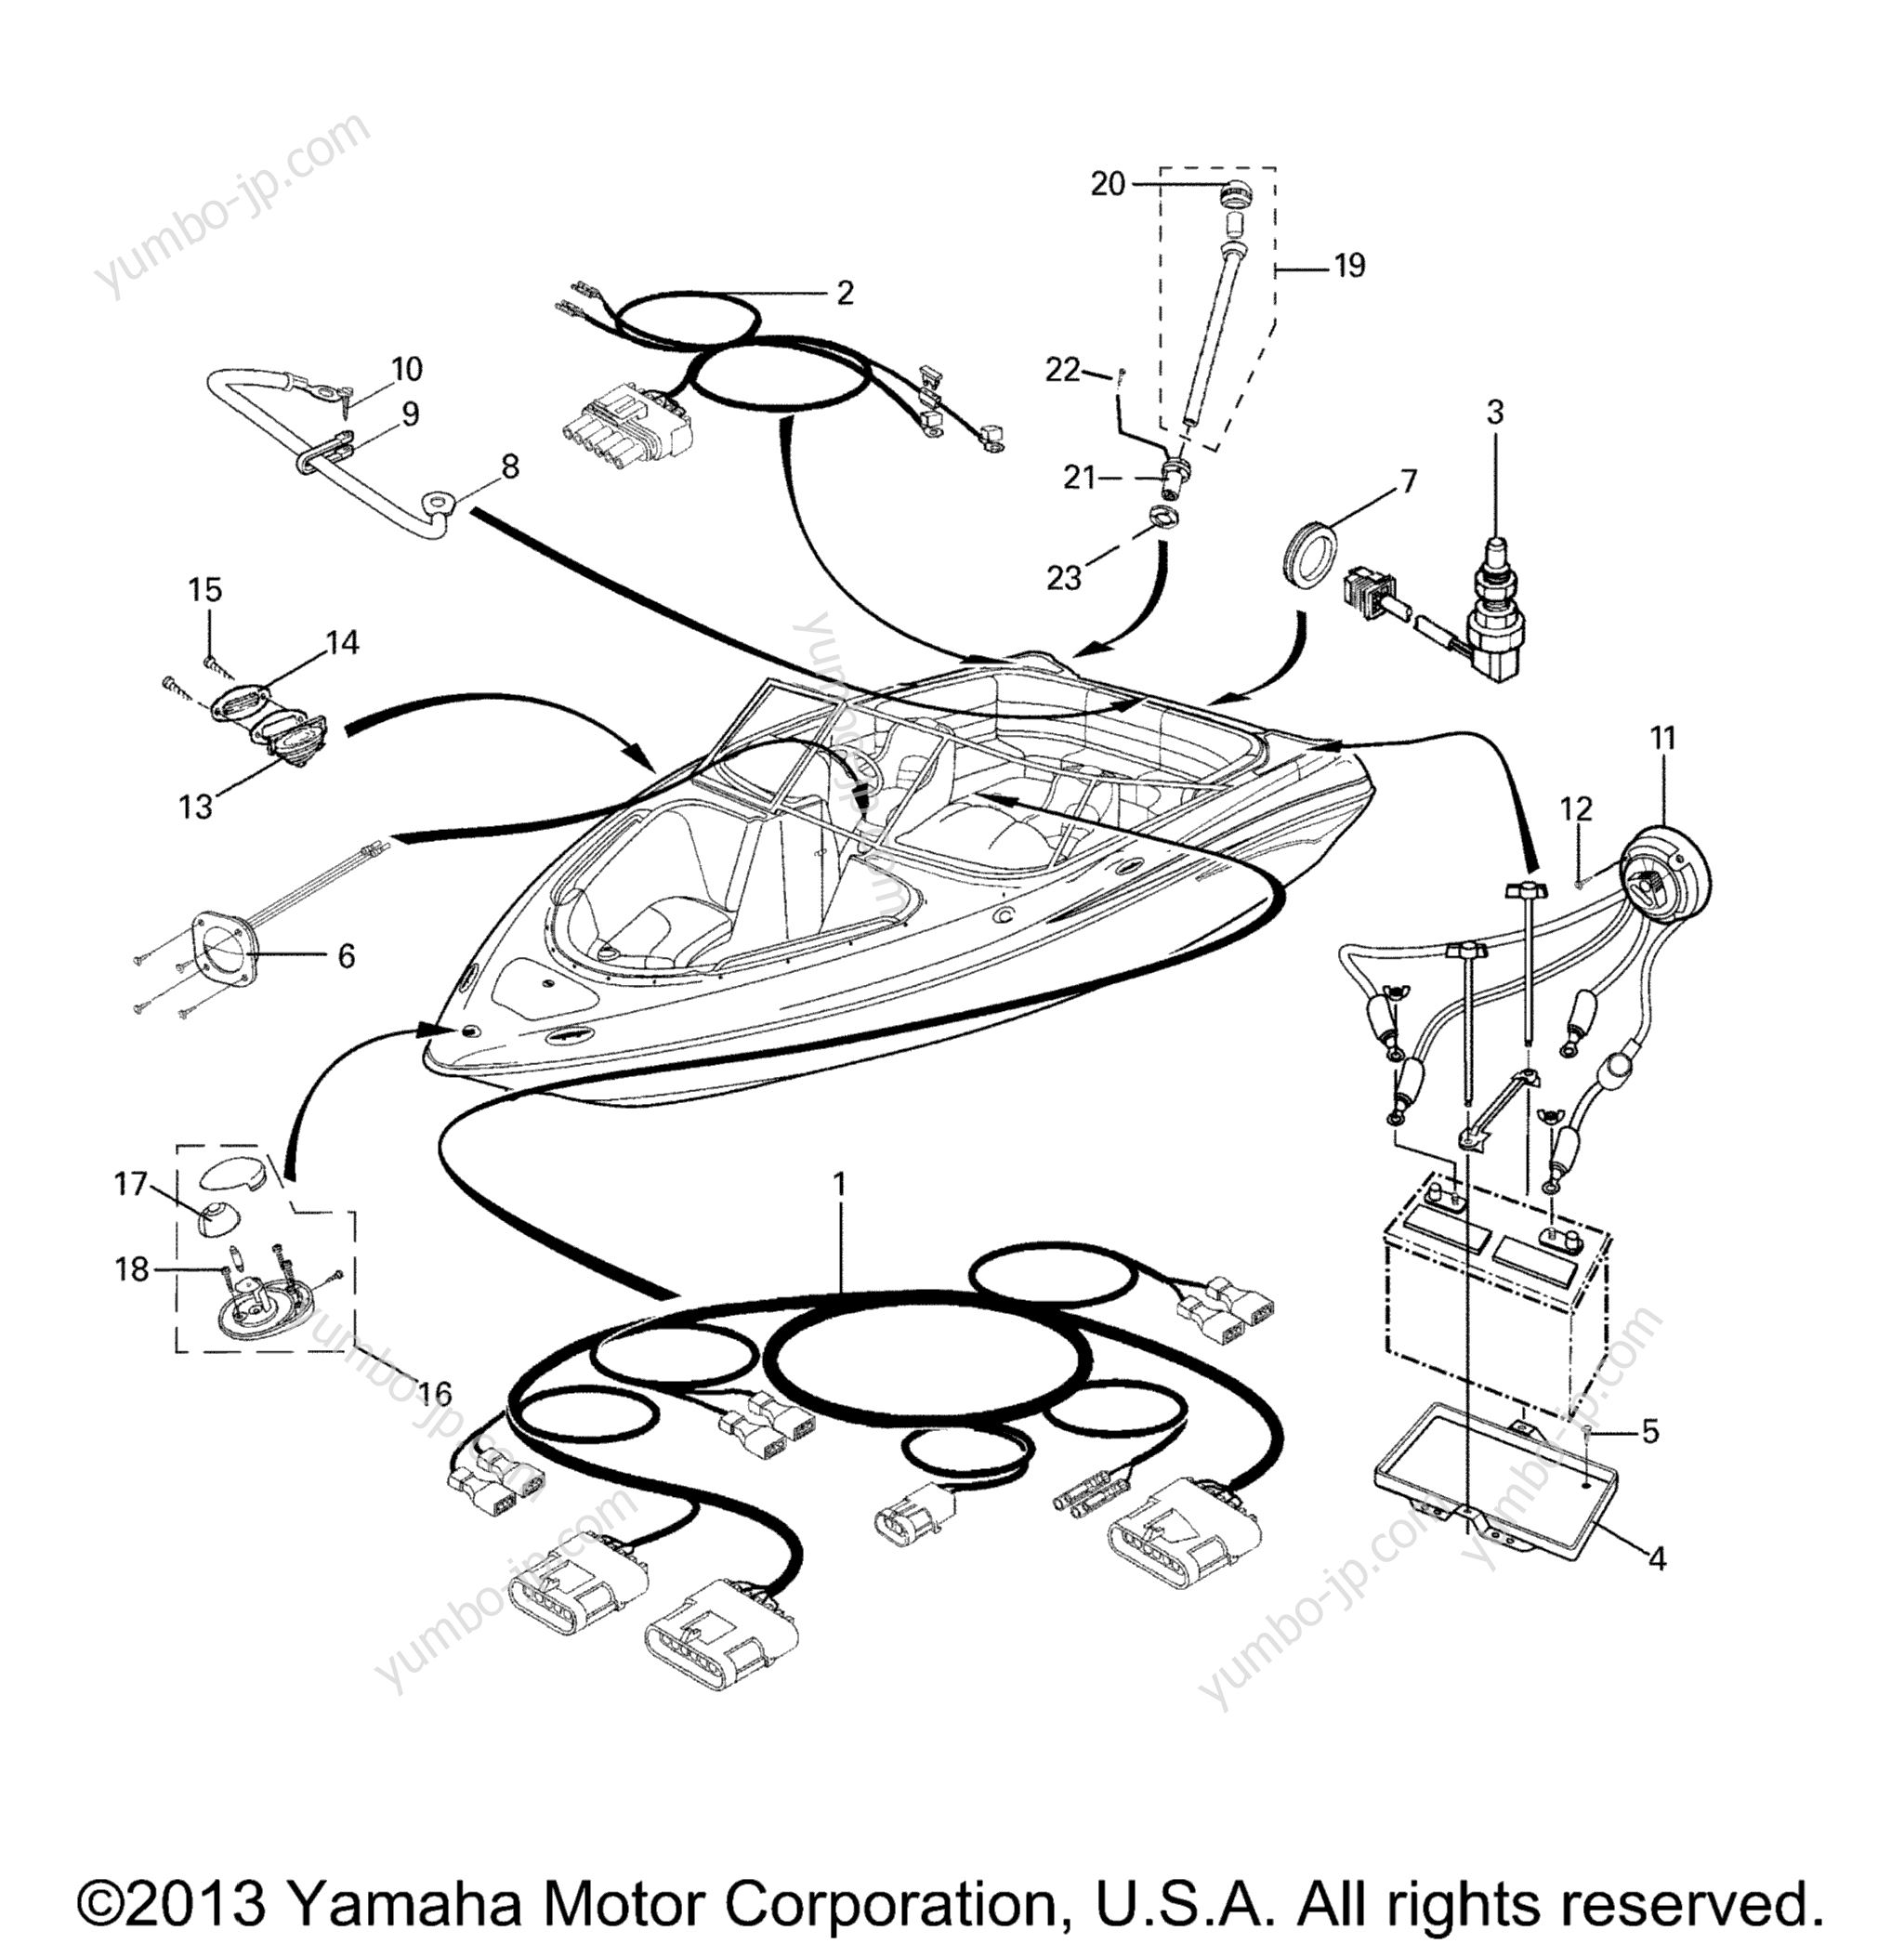 Electrical 3 for boats YAMAHA SX230 (SRT1000AE) 2006 year